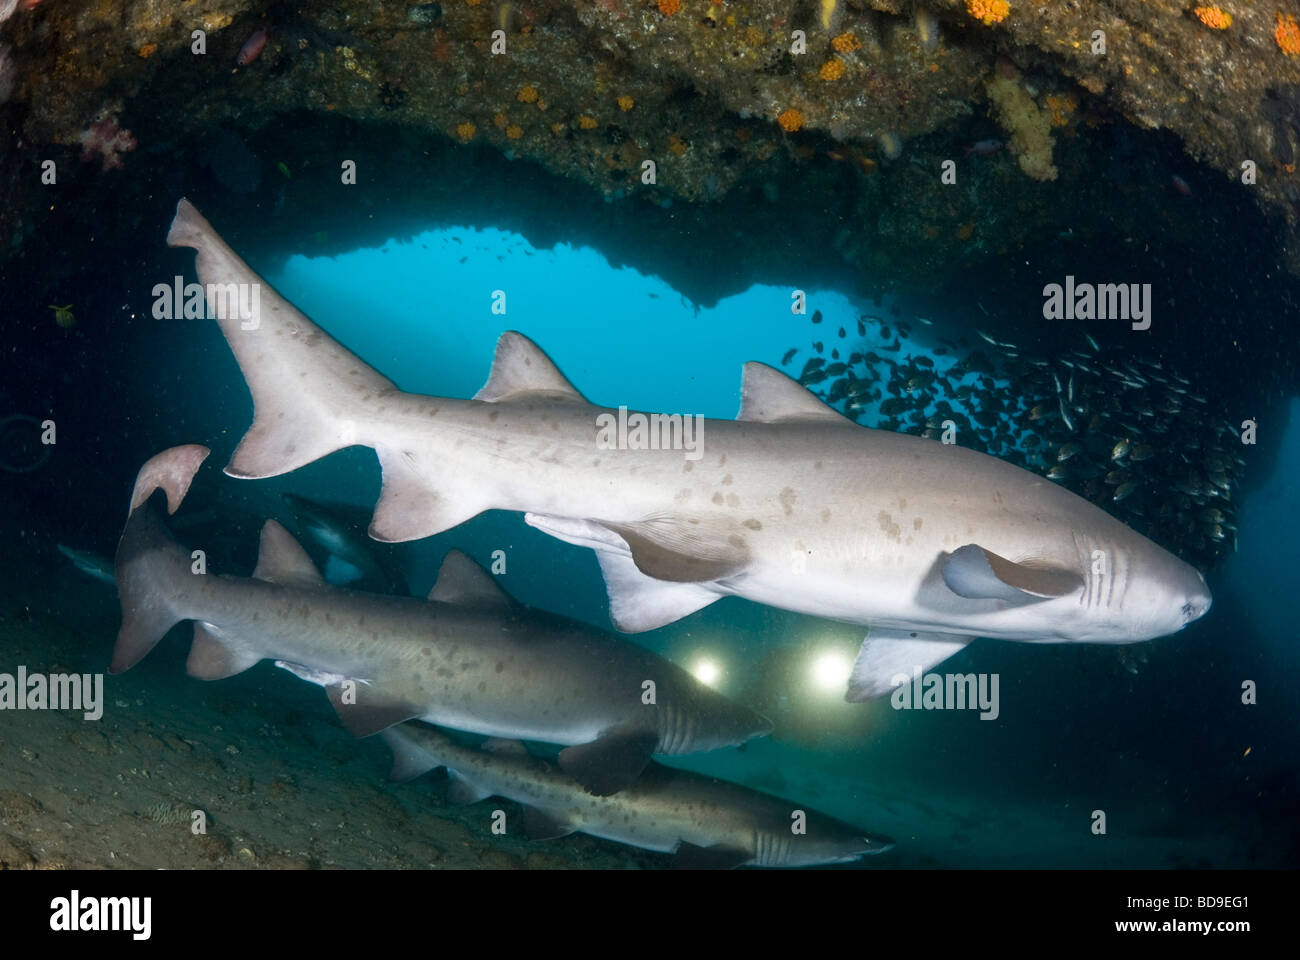 Ragged tooth sharks or Sand tigers (Carcharias taurus), Aliwal Shoal, South Africa Stock Photo